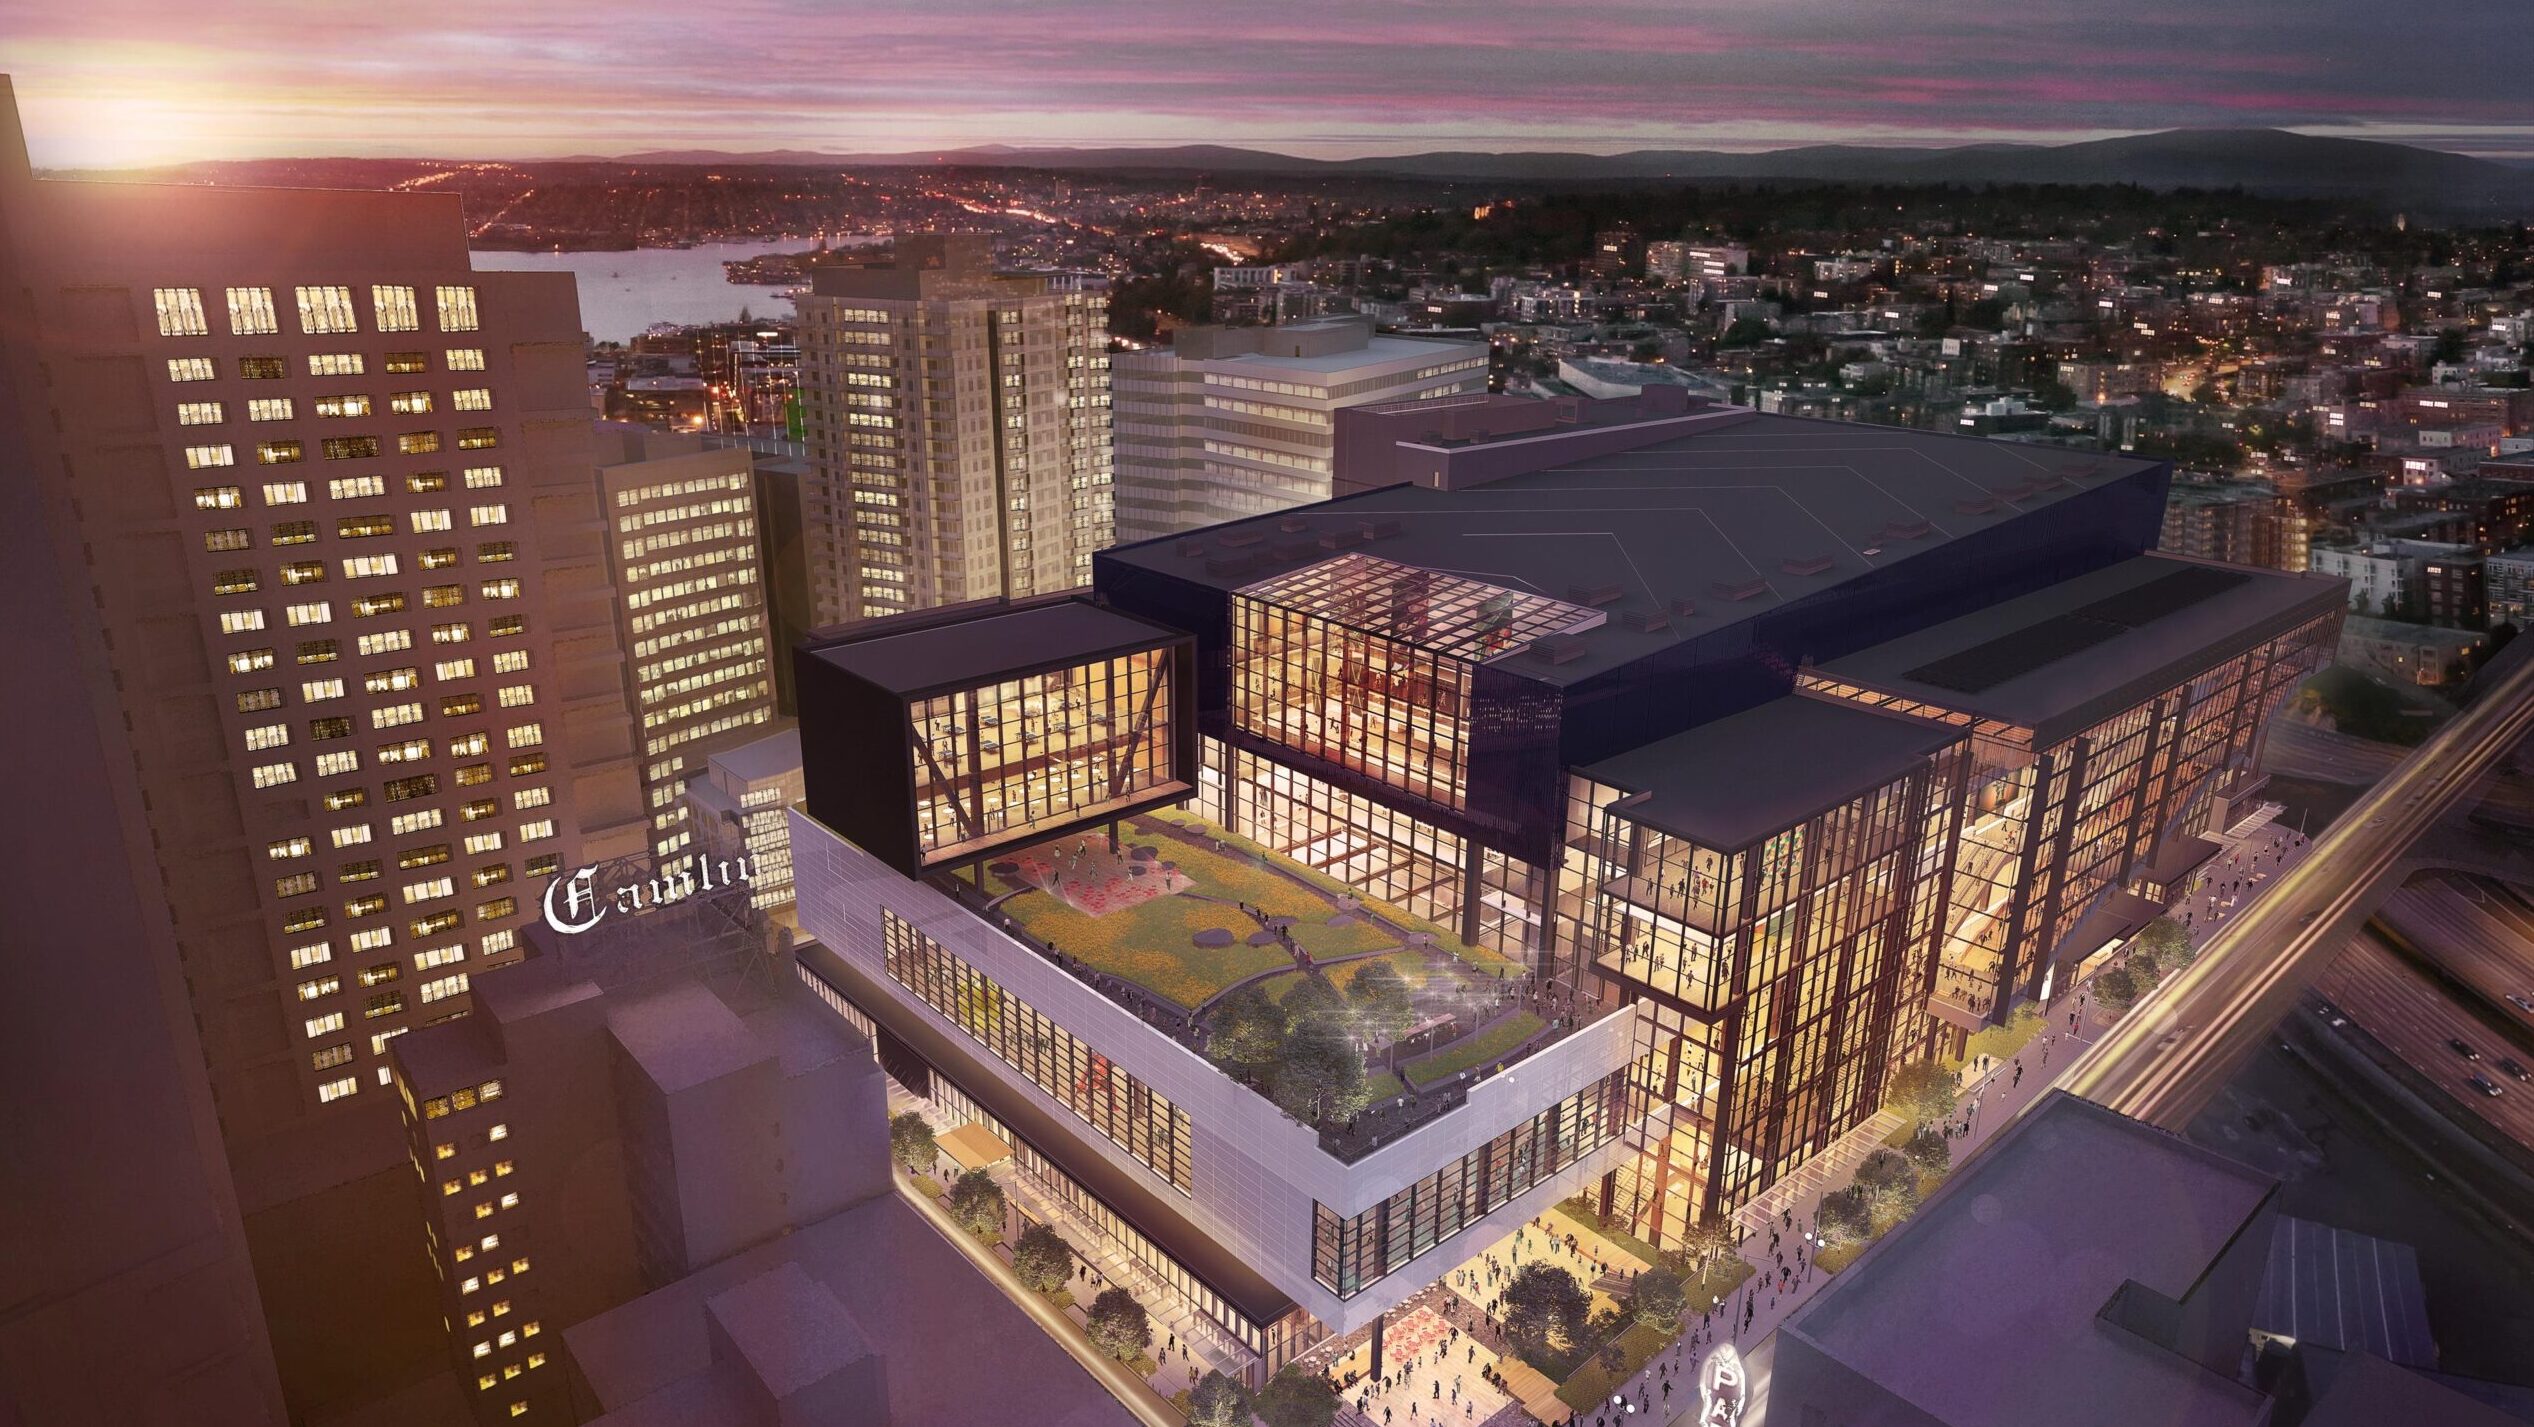 Washington State Convention Center Gets Final Funding for Expansion